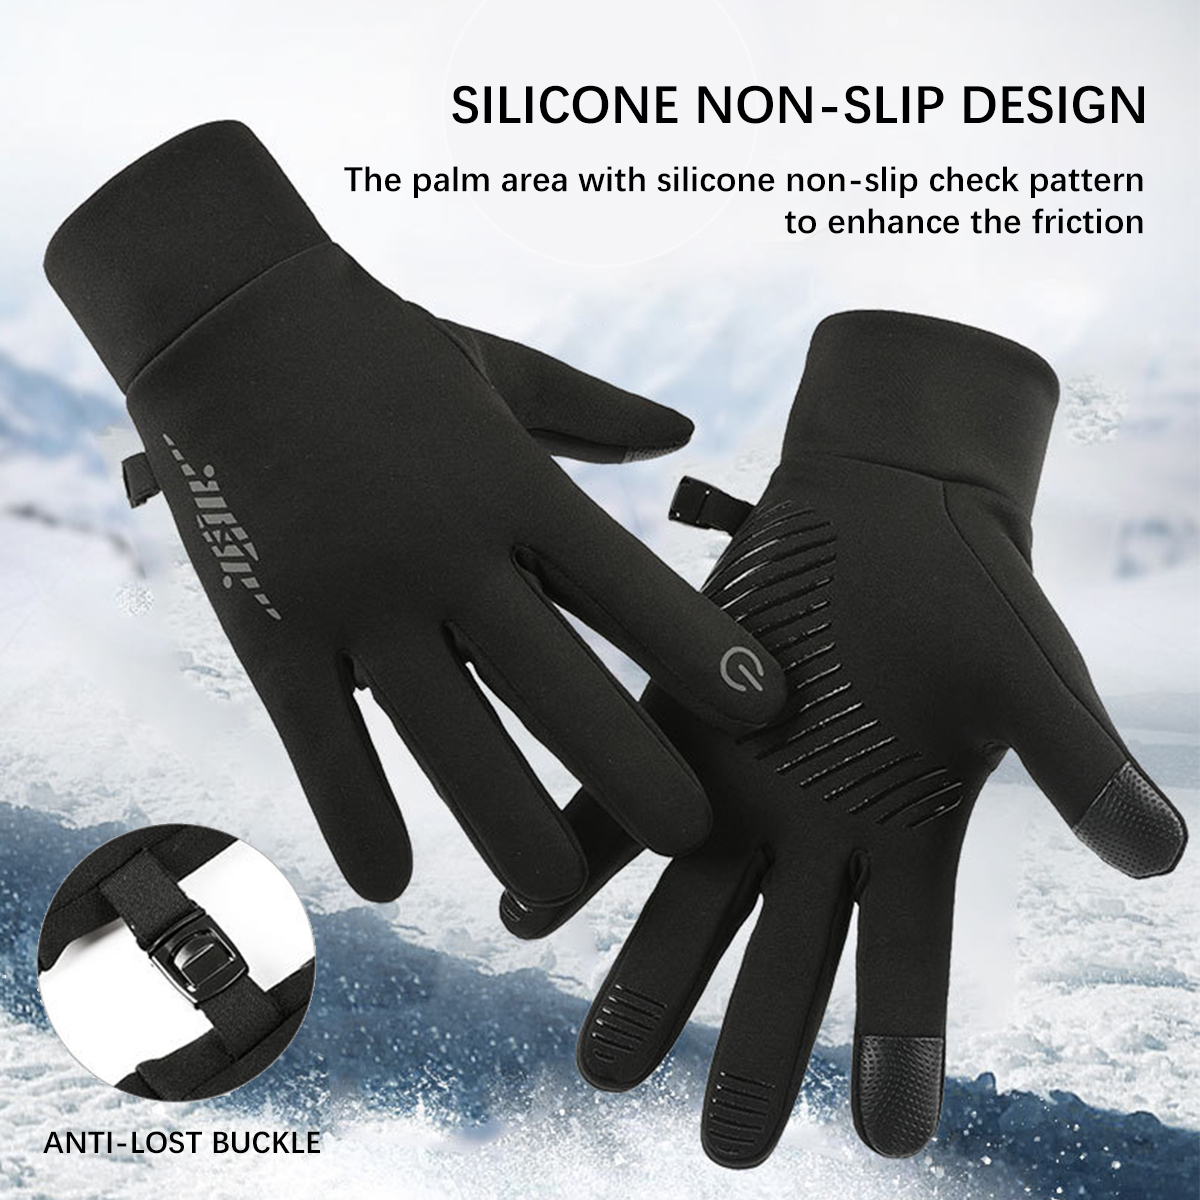 Winter-Warm-Touch-Screen-Thermal-Gloves-Ski-Snow-Snowboard-Cycling-Waterproof-Windproof-Gloves-1923176-5